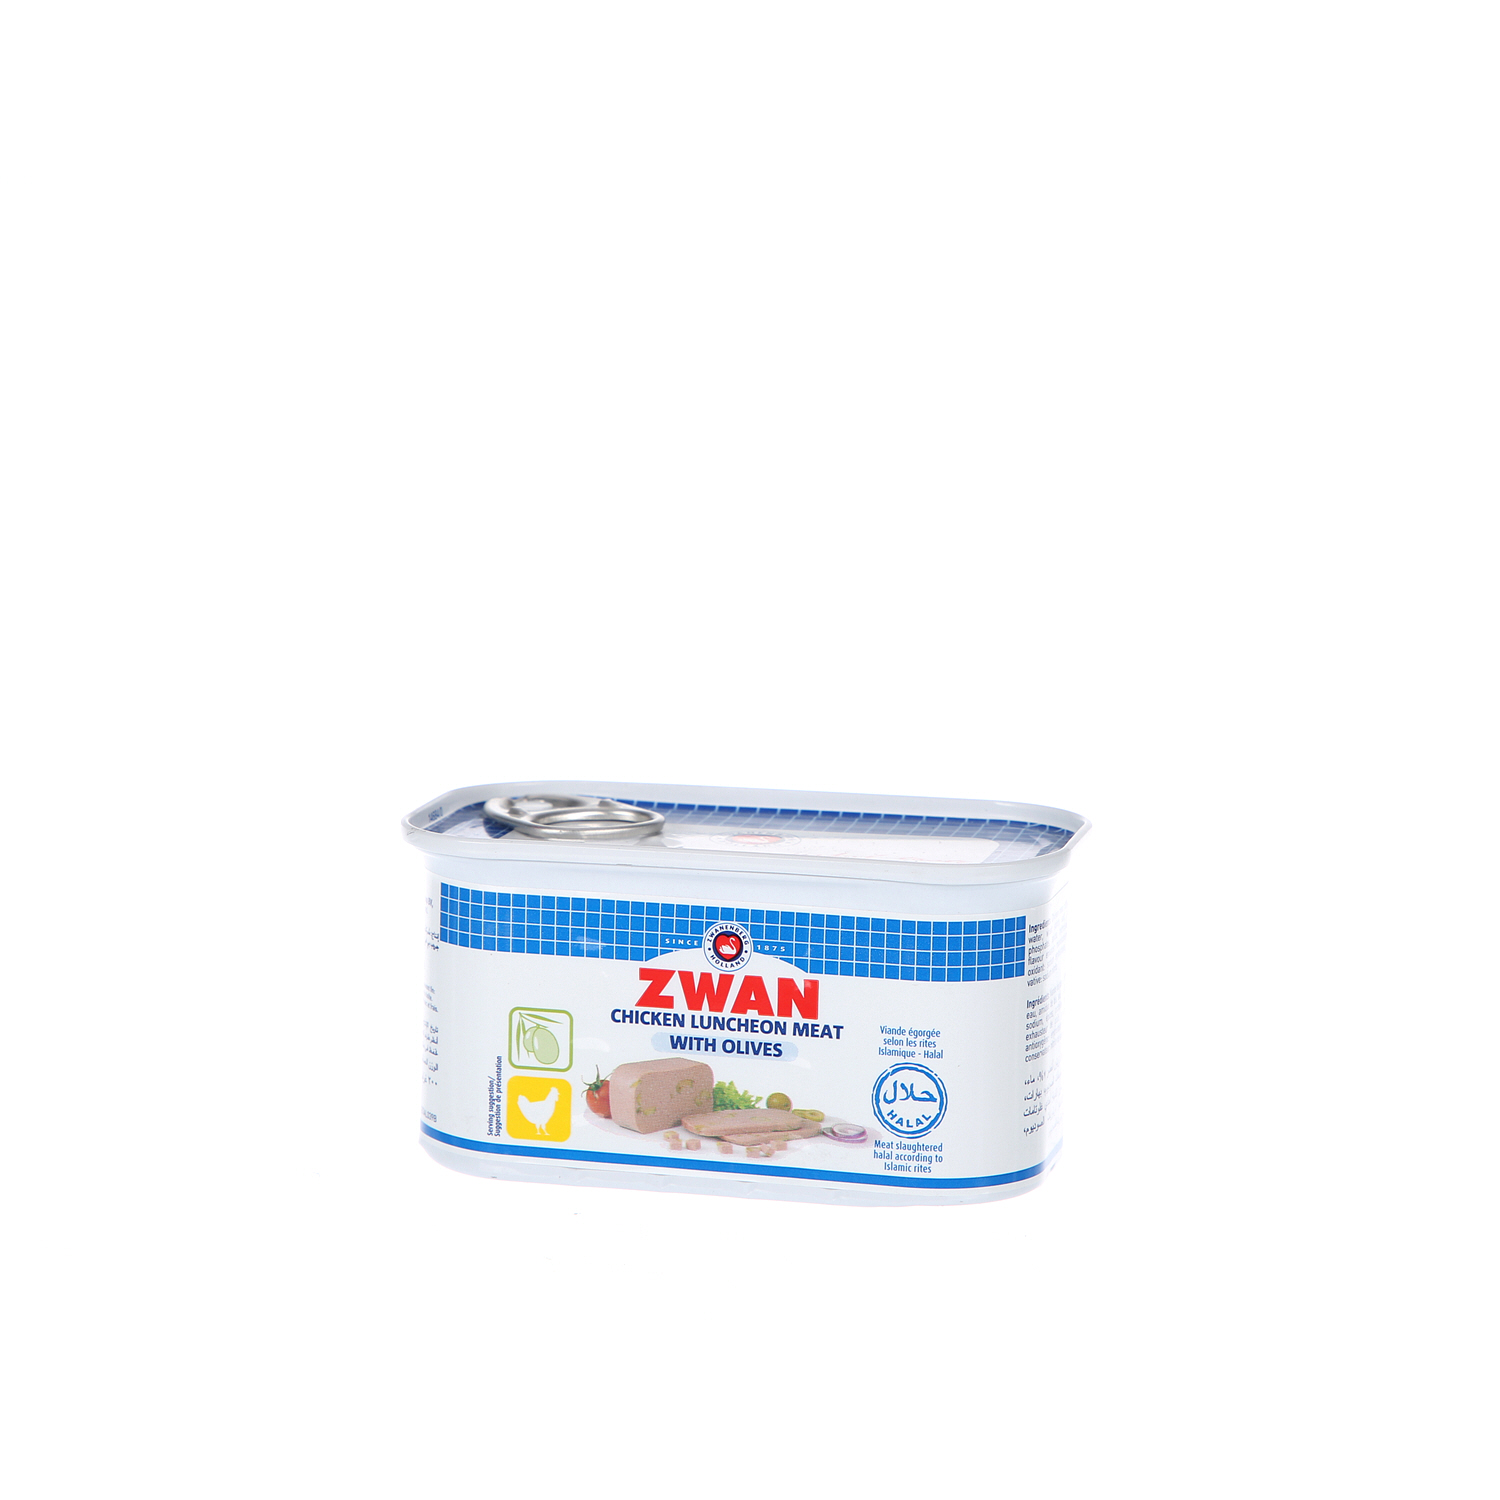 Zwan Luncheon Meat with Olives 200gm